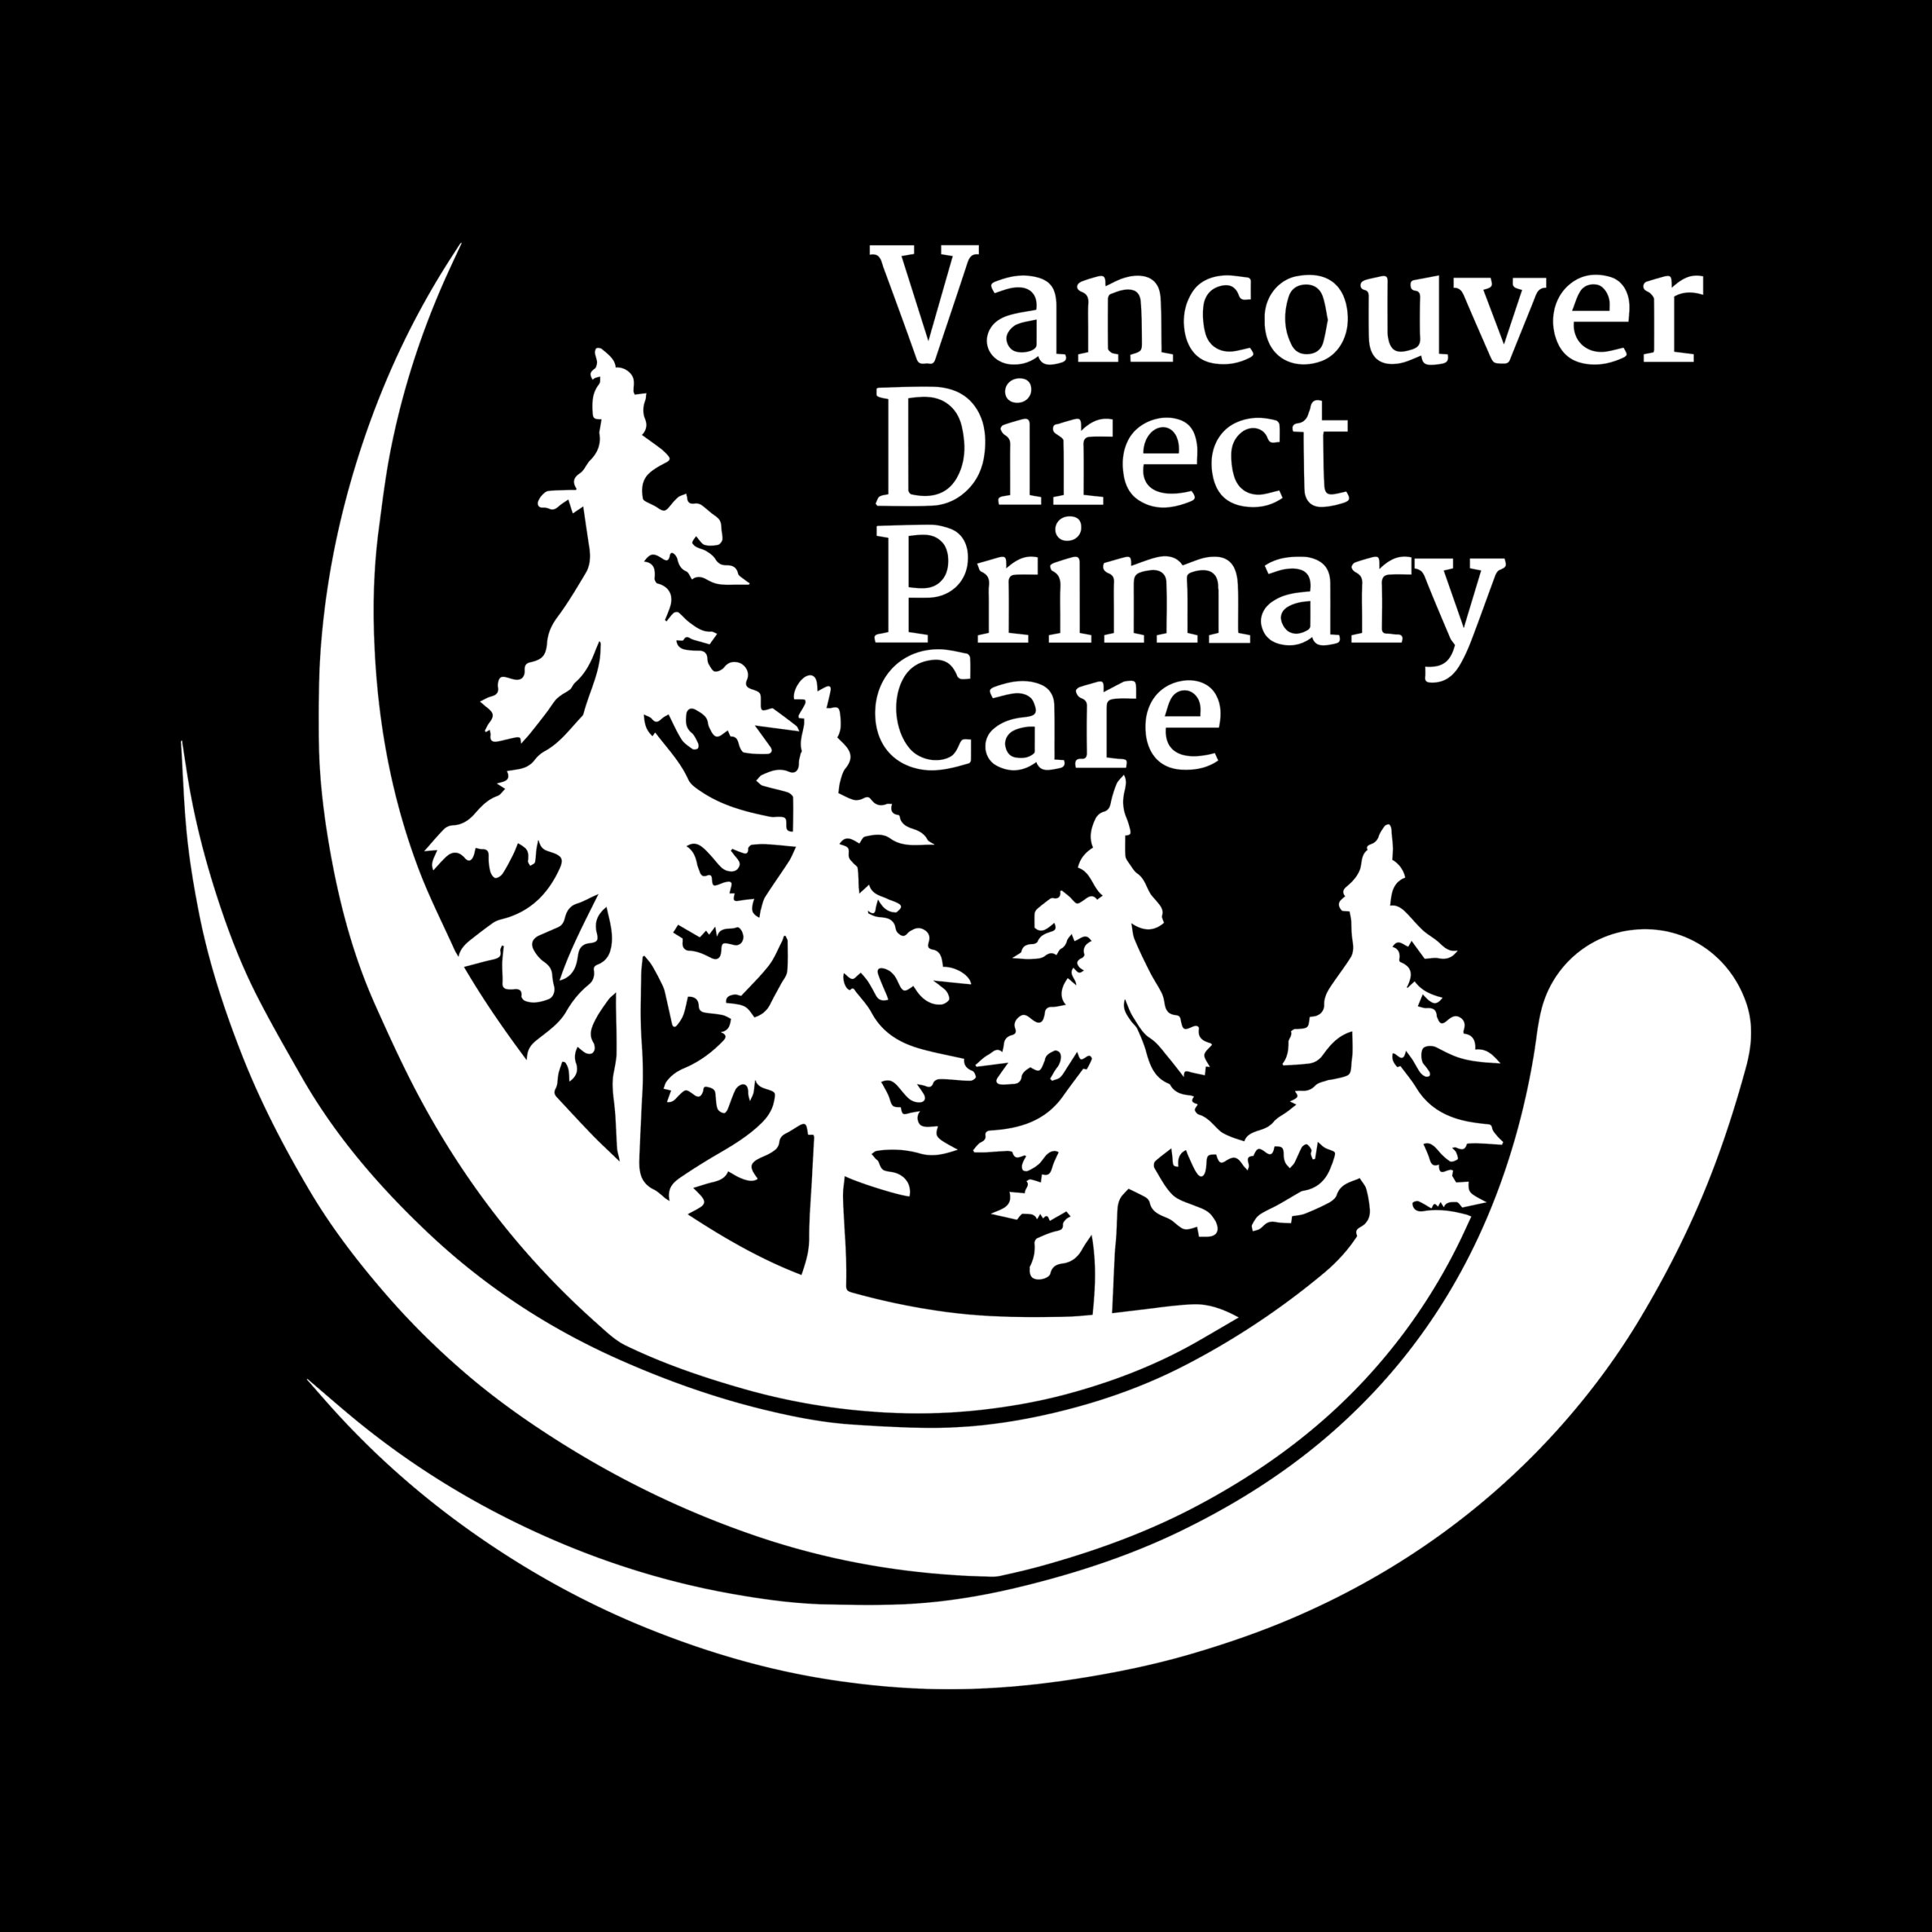 Vancouver Direct Primary Care